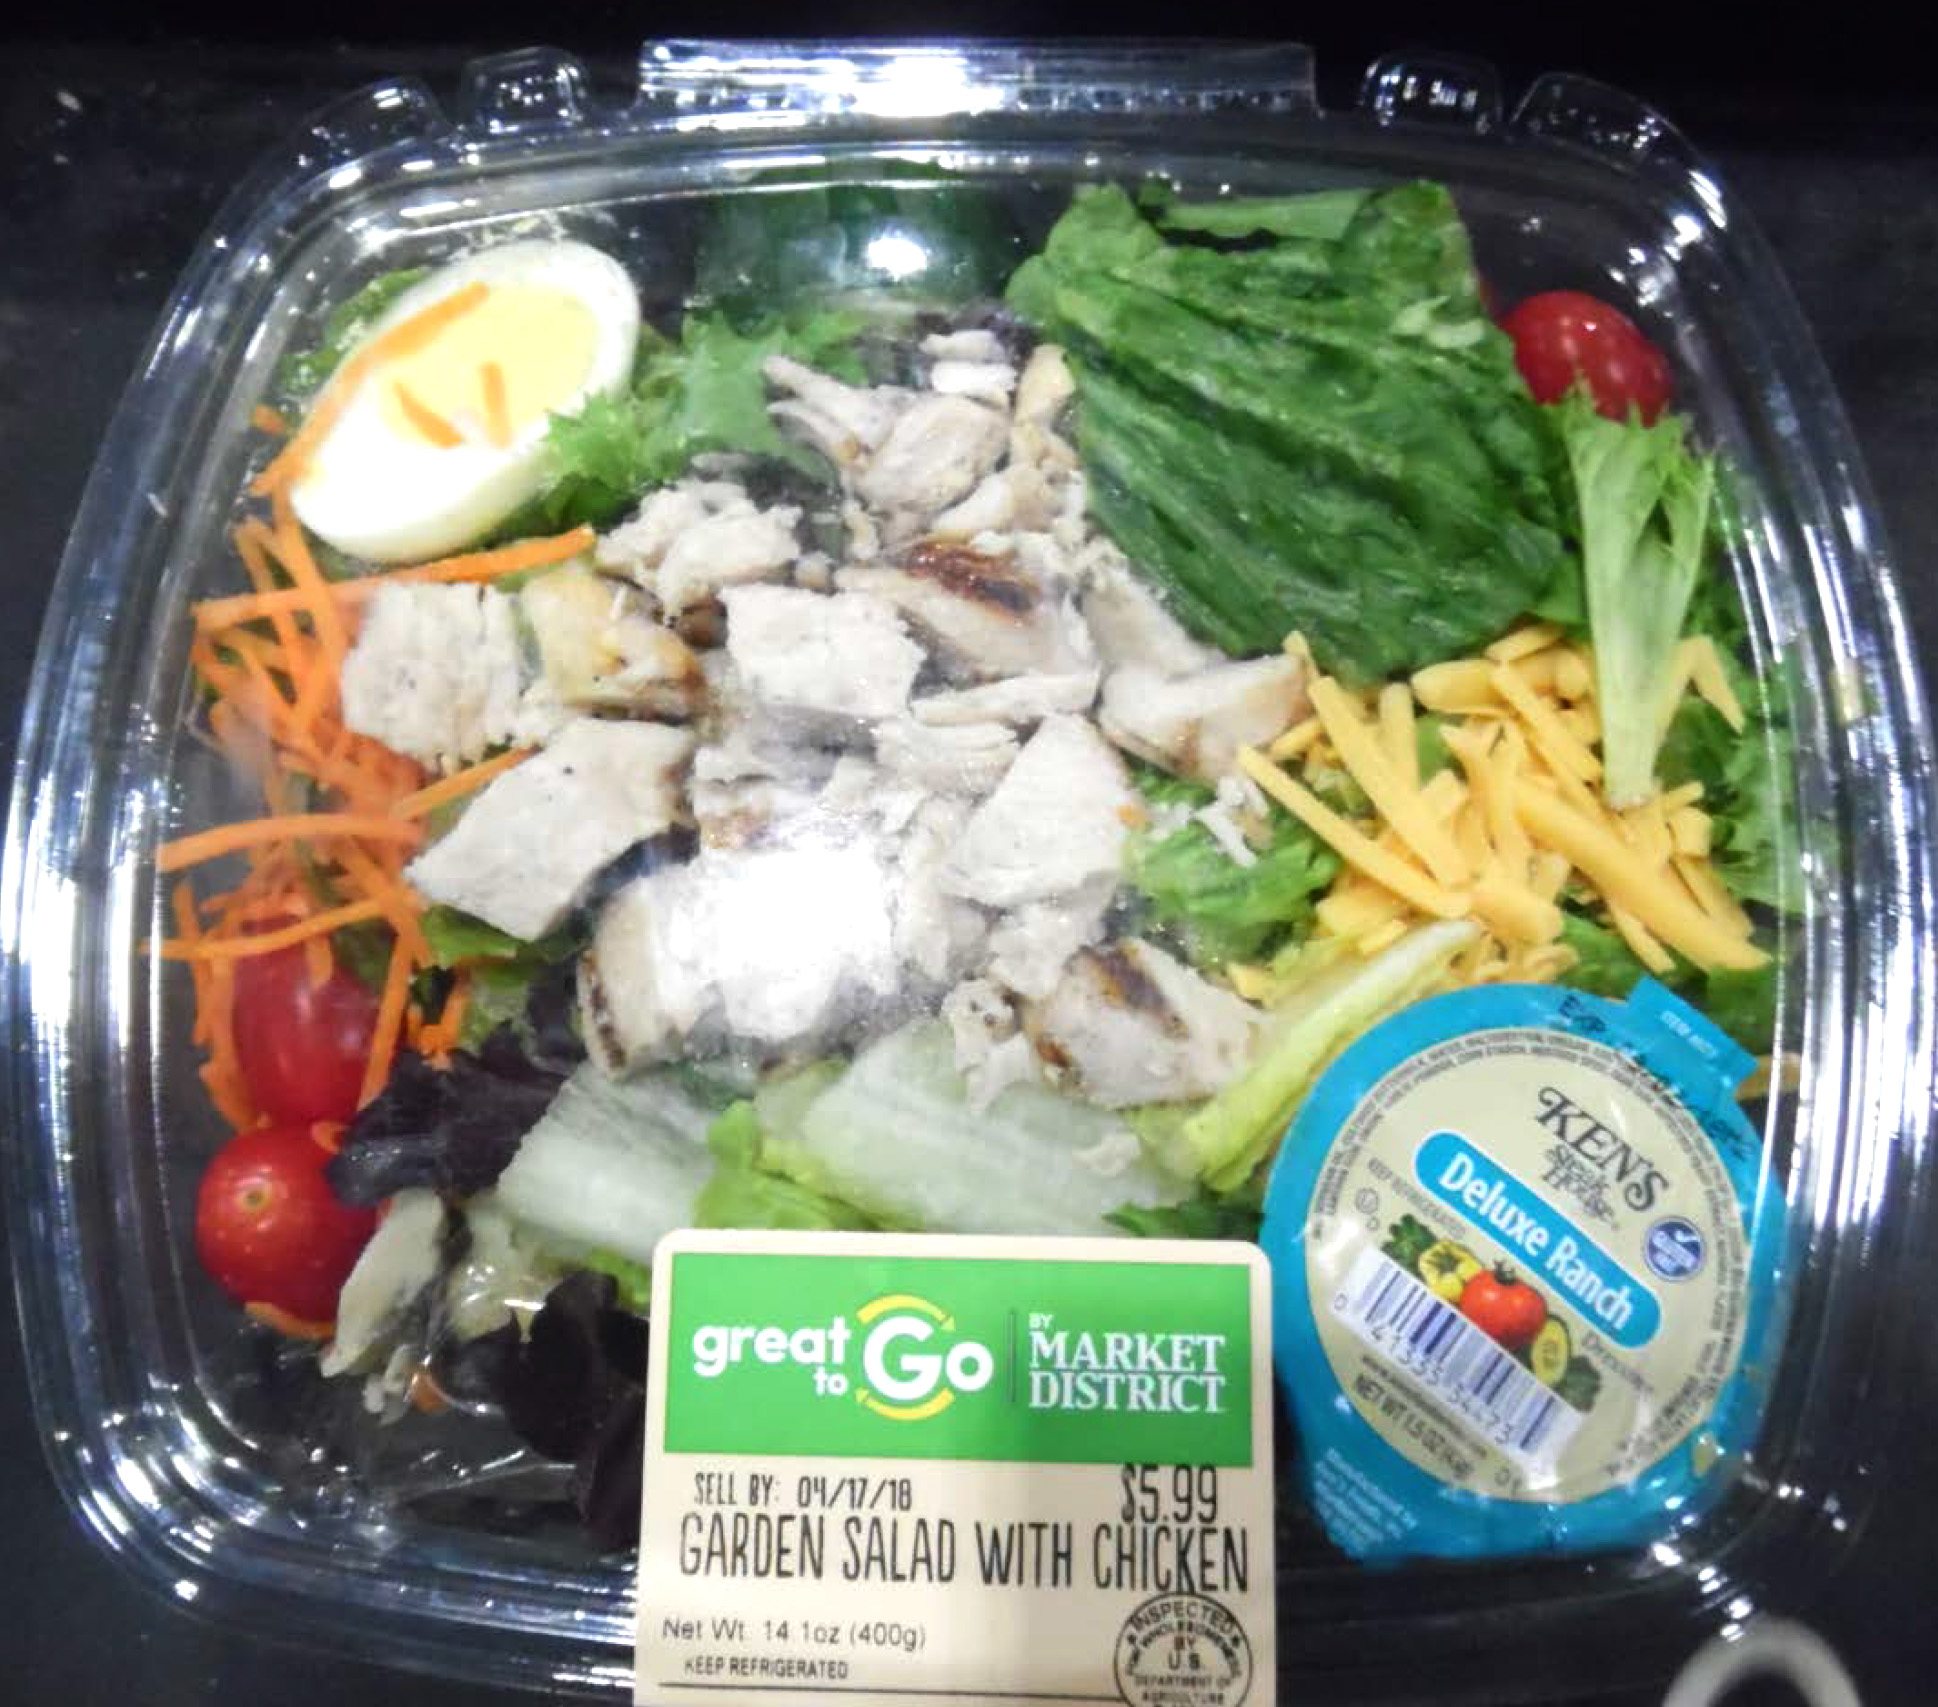 PHOTO: Fresh Foods Manufacturing is recalling there “Great to Go by Market District” following an E. coli outbreak that has spread to several states and sickened dozens of people.
